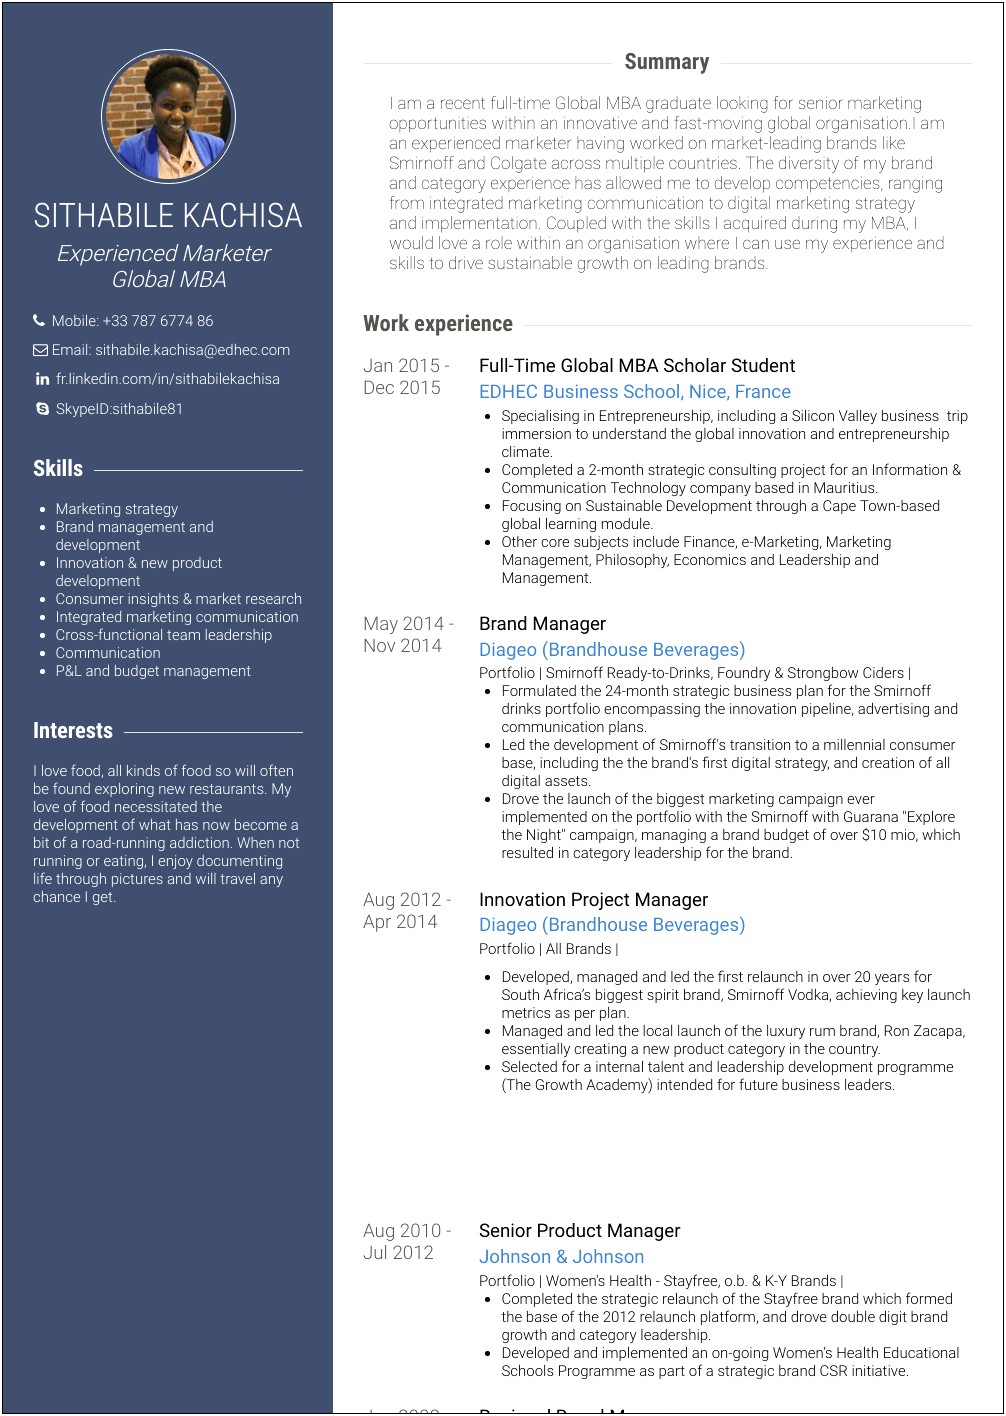 Resume Objective Statement Examples For Consulting